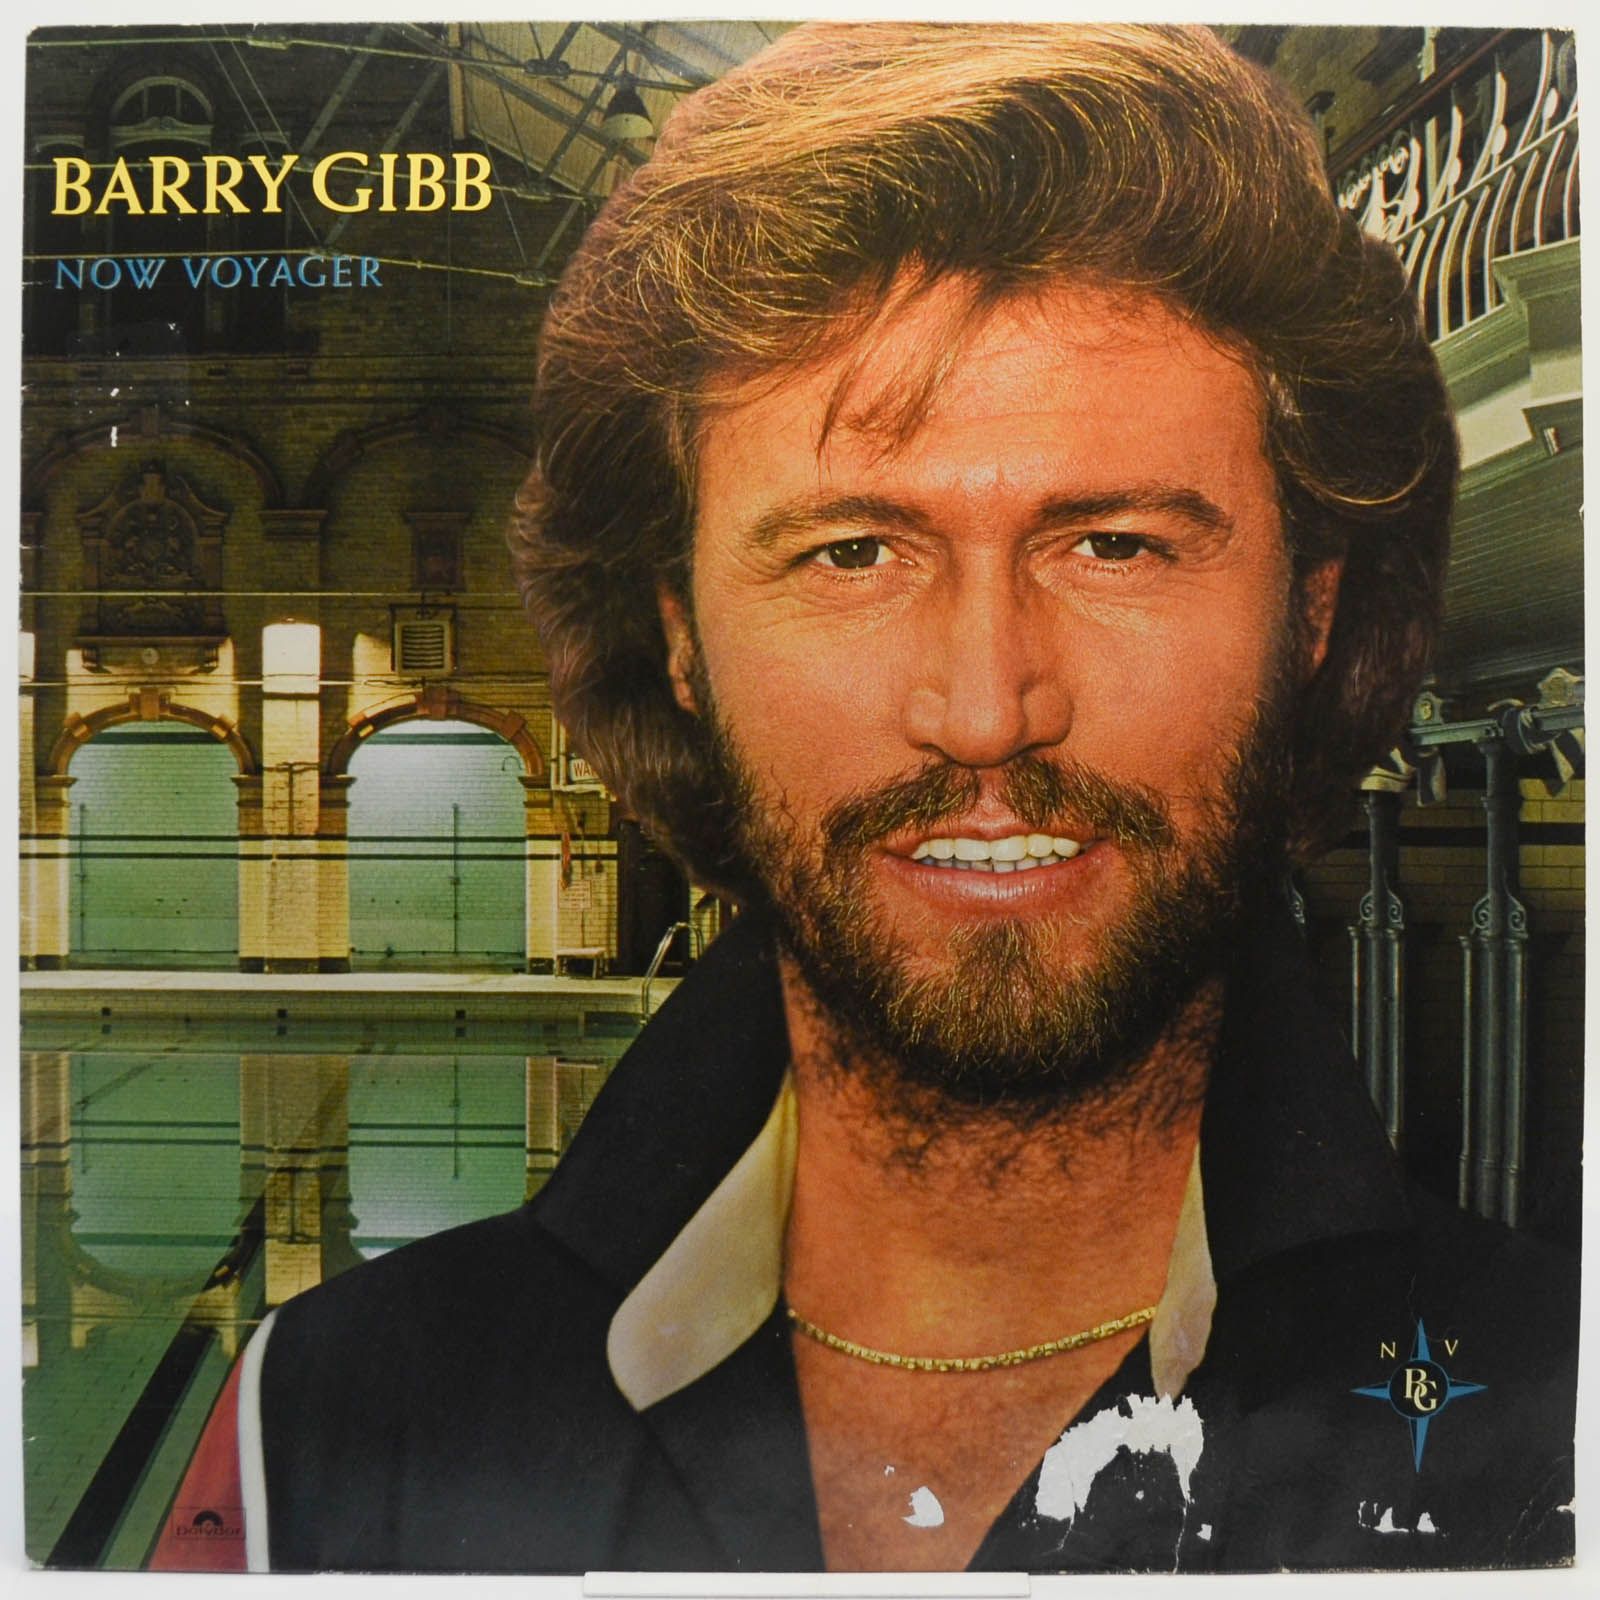 Barry Gibb — Now Voyager, 1984